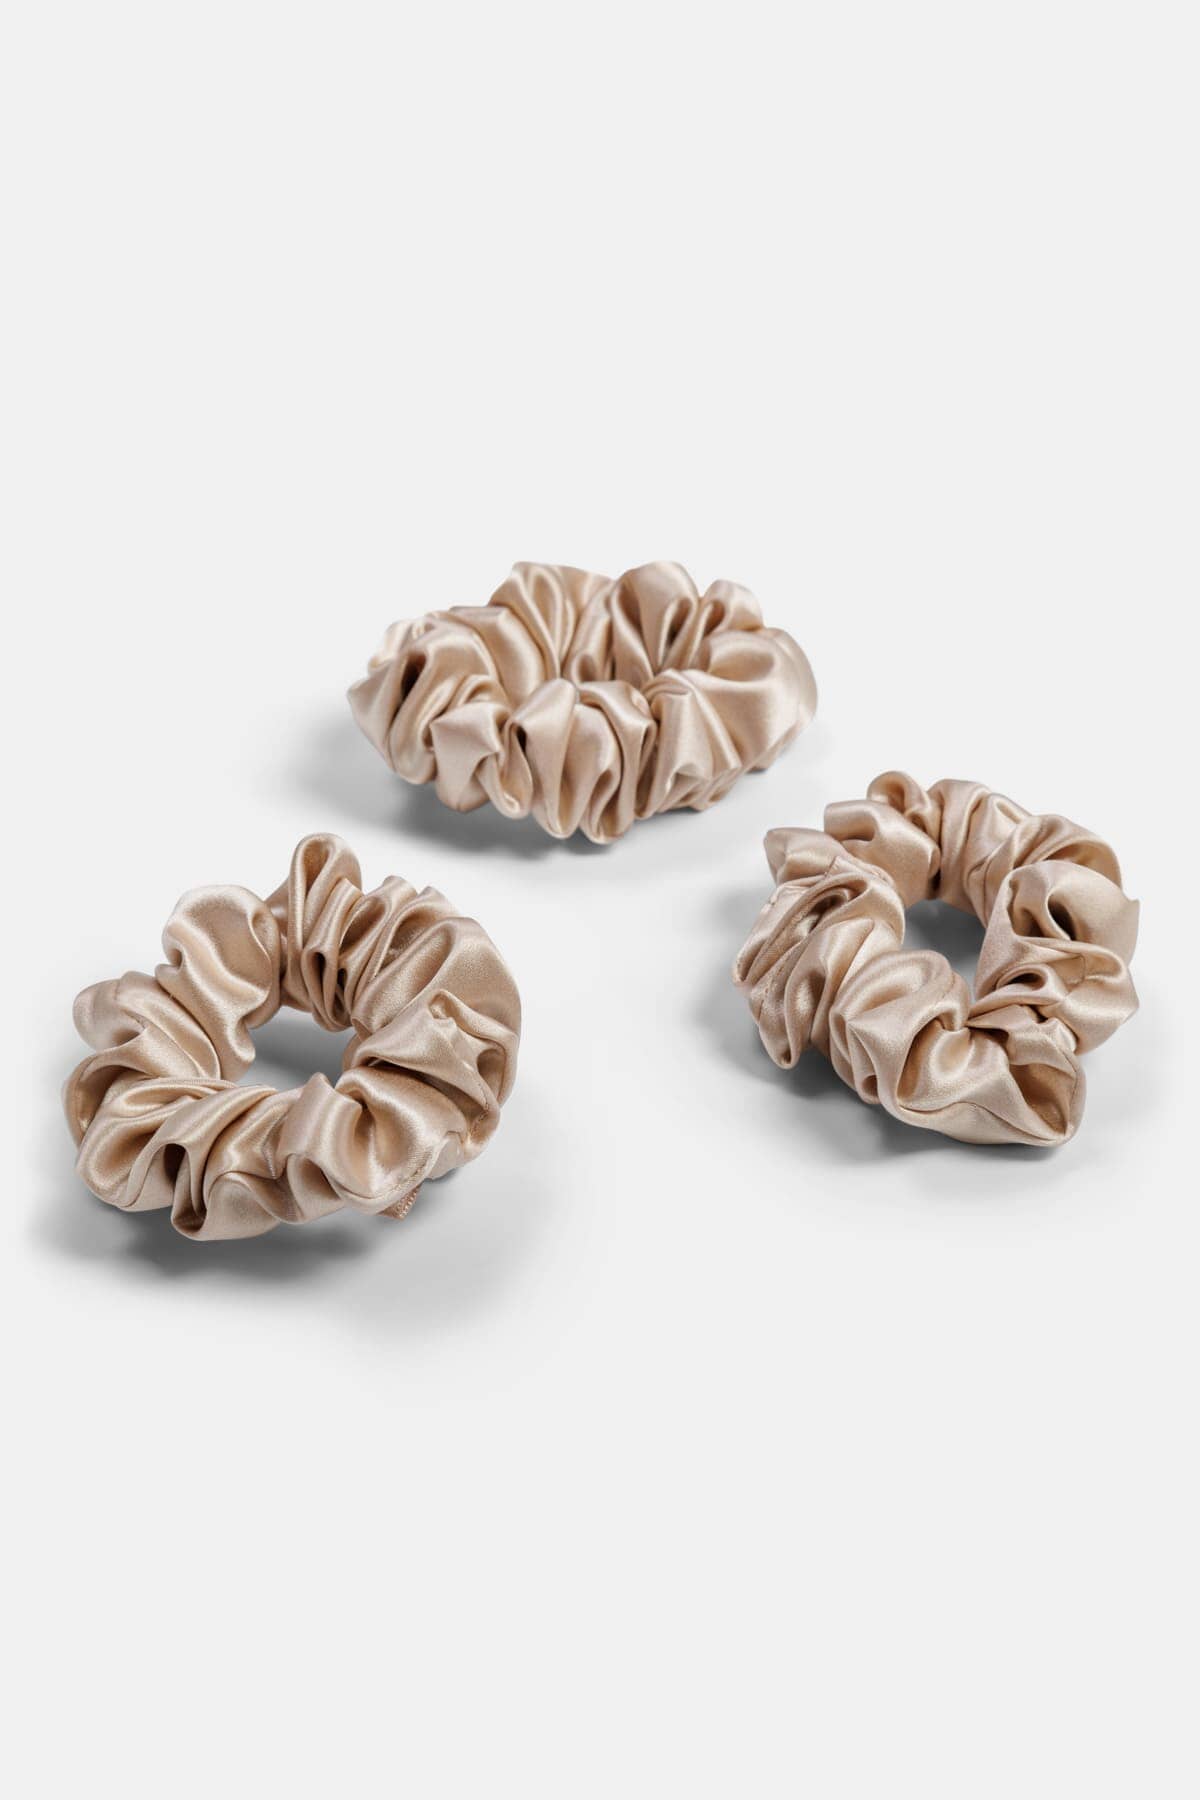 100% Pure Mulberry Silk Hair Scrunchies with Gift Box - Set of 3 Large Hair Ties Womens>Beauty>Hair Care Fishers Finery Taupe 